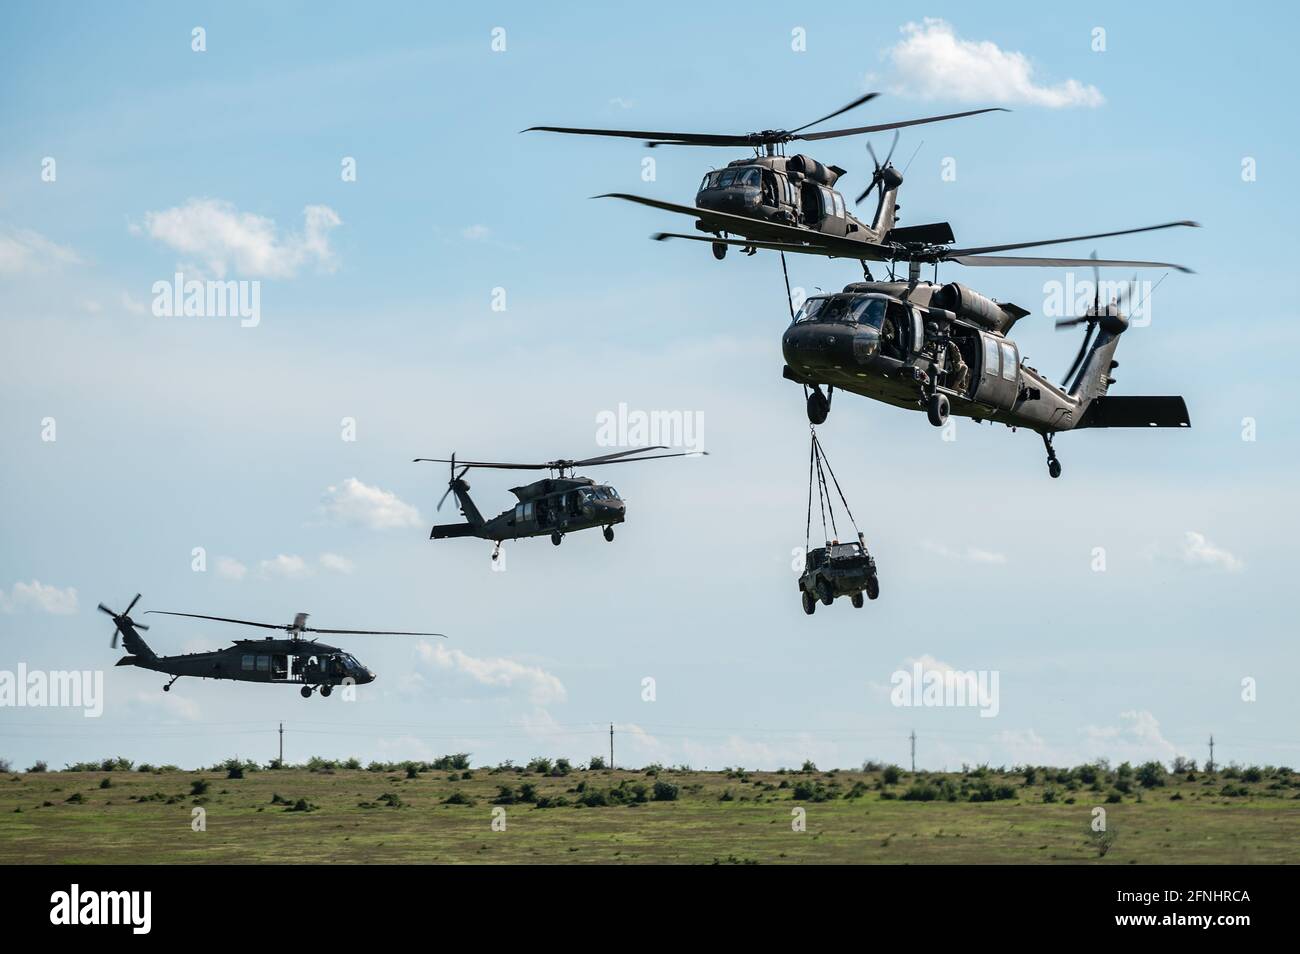 U.S. UH-60 Black Hawk helicopters from 3rd Battalion, 1st Aviation Regiment, 1st CAB conduct sling load operations with equipment from the Dutch 11th Air Assault Brigade of the Royal Netherlands Arm during exercise Falcon Response 21 at Mihail Kogalniceanu Air Base, May 15, 2021 in Mihail Kogalniceanu, Romania. Stock Photo